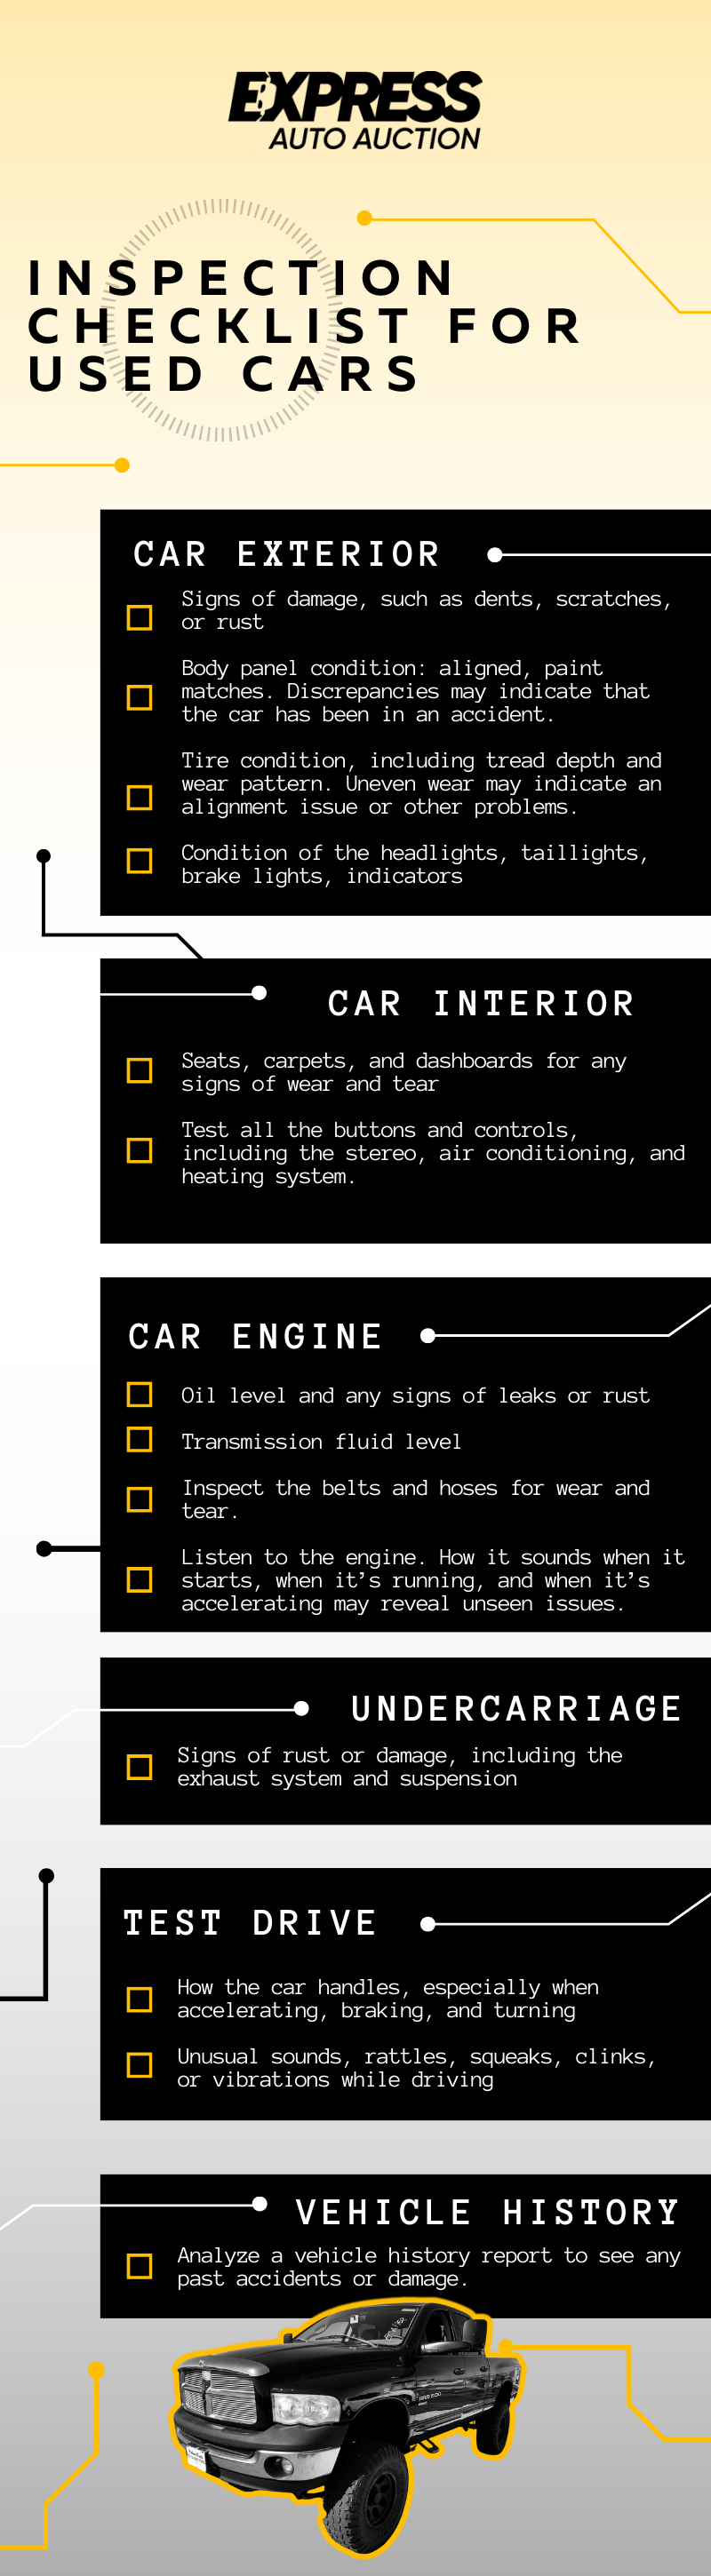 A handy checklist infographic for when you inspect used cars at auction.